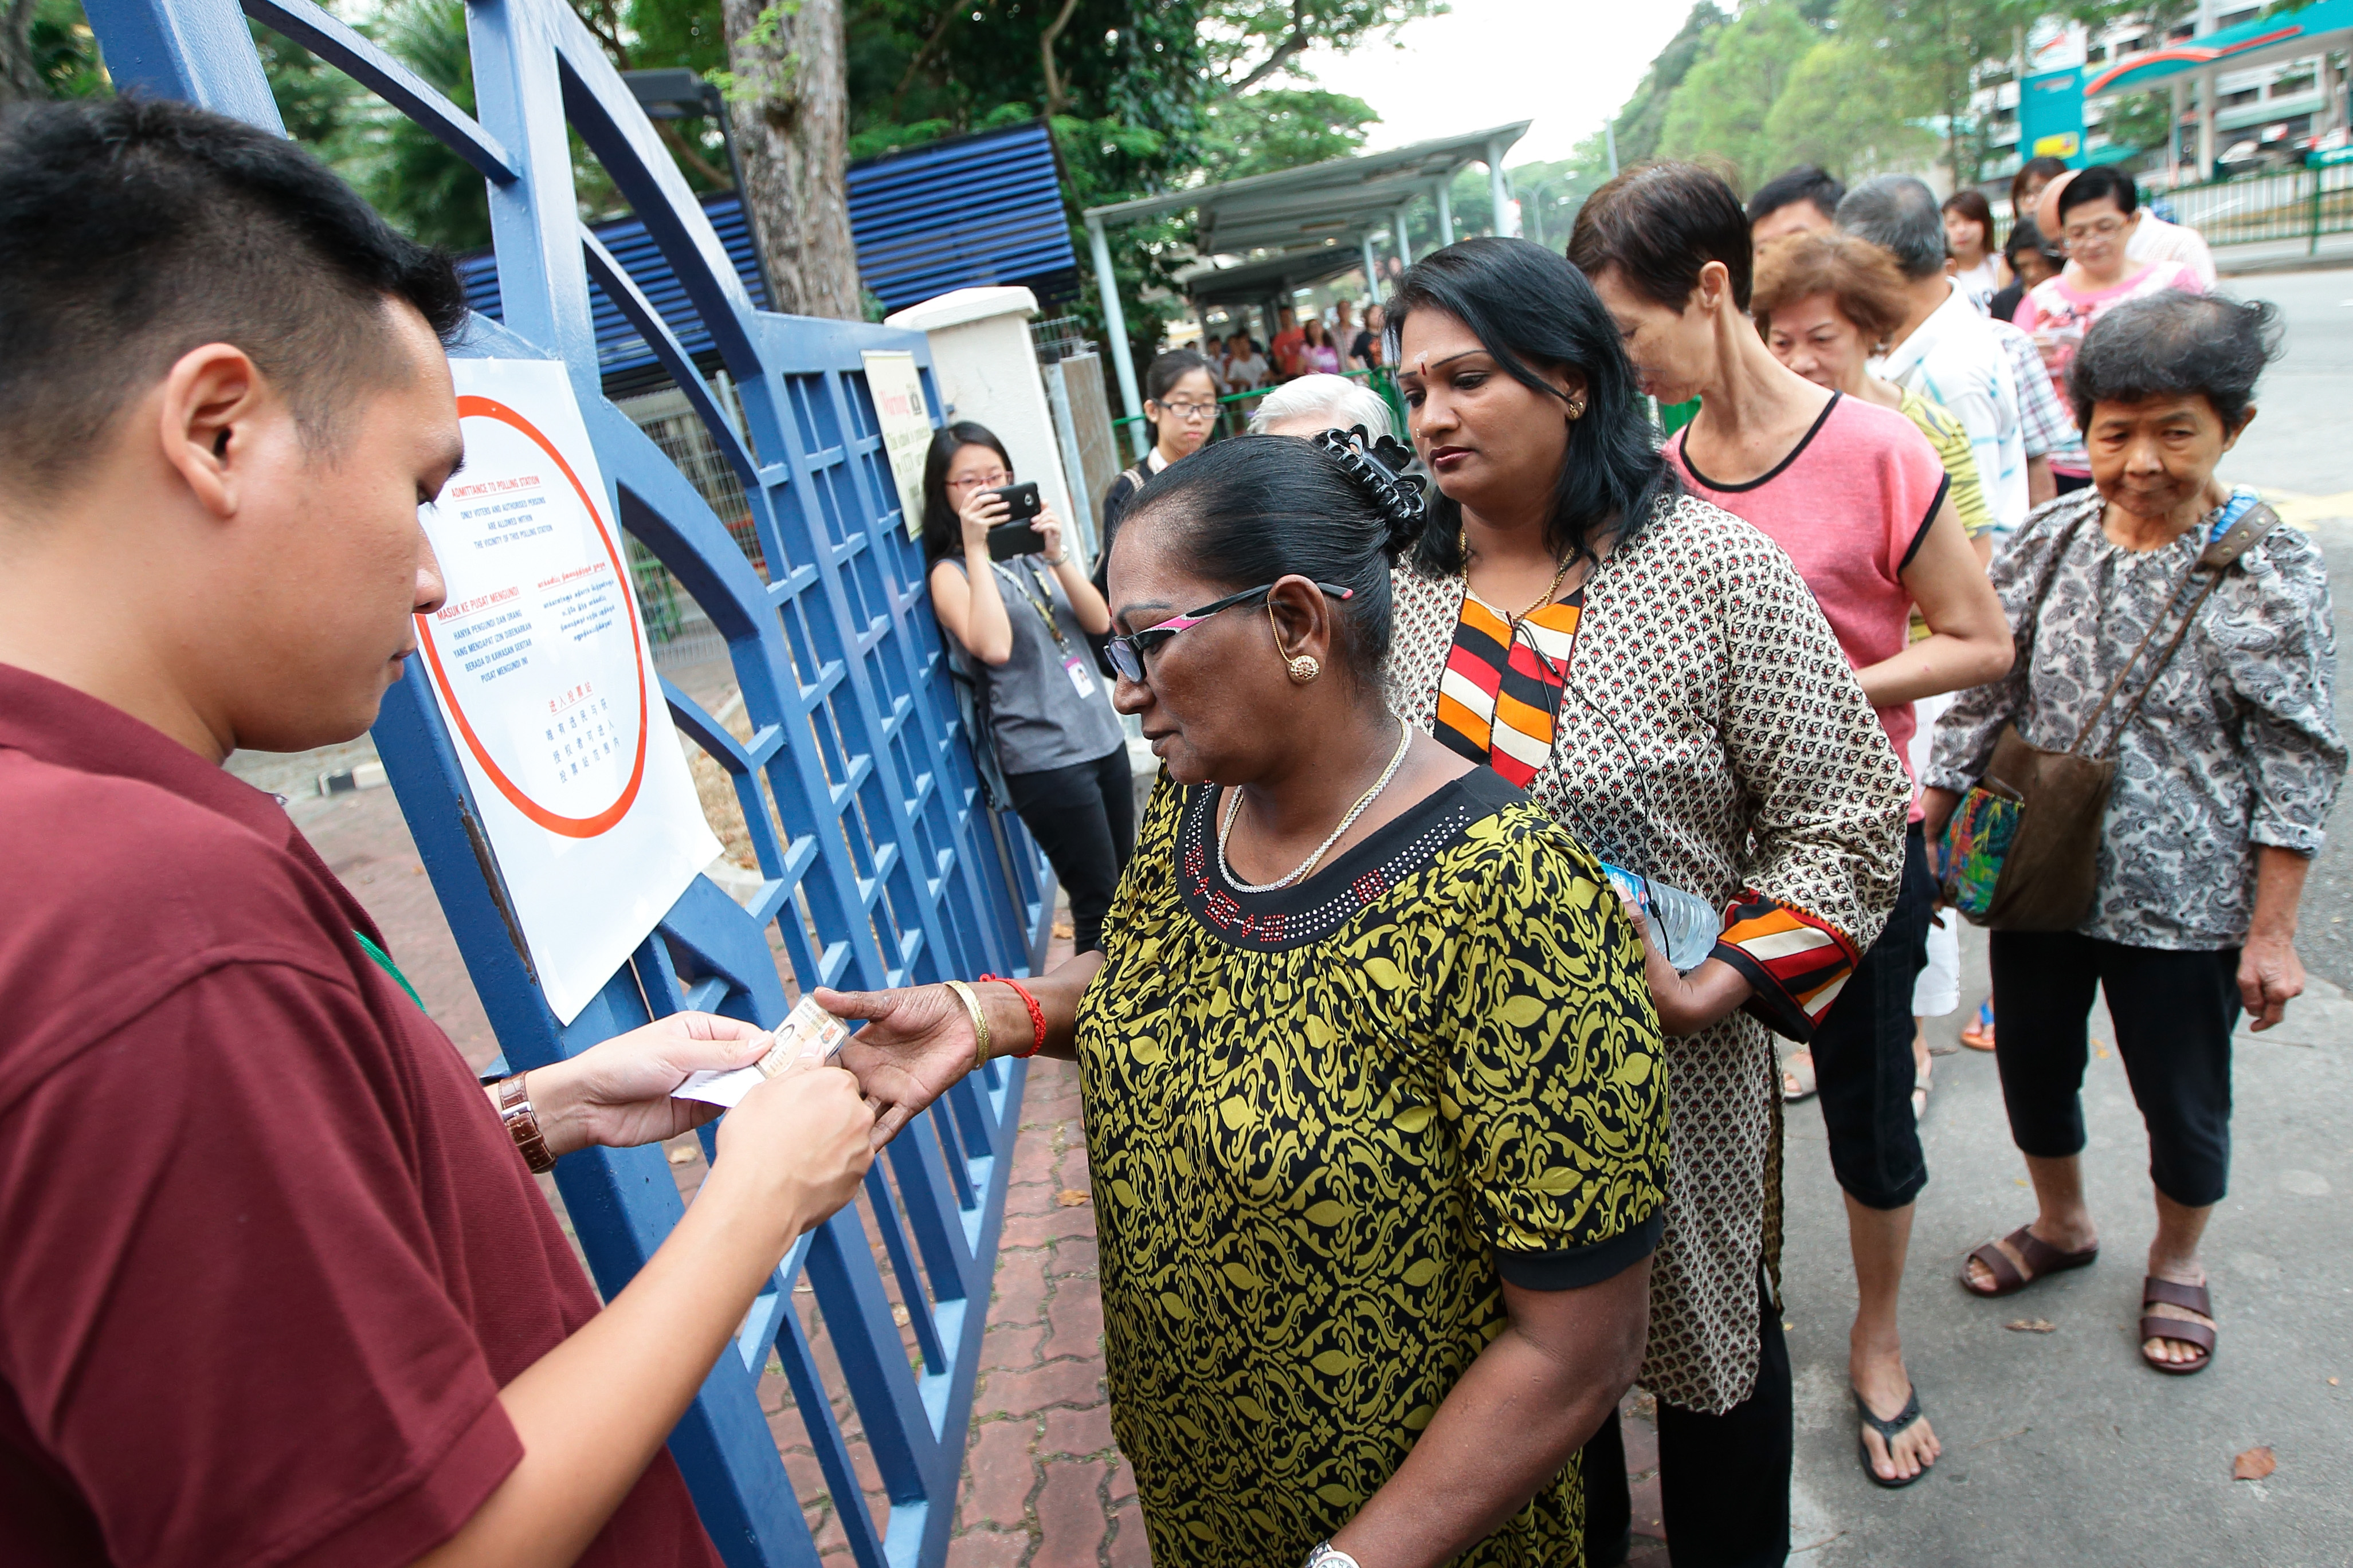 Voters line up to cast their ballots at a polling station on Sept. 11, 2015, in Singapore (Suhaimi Abdullah—Getty Images)